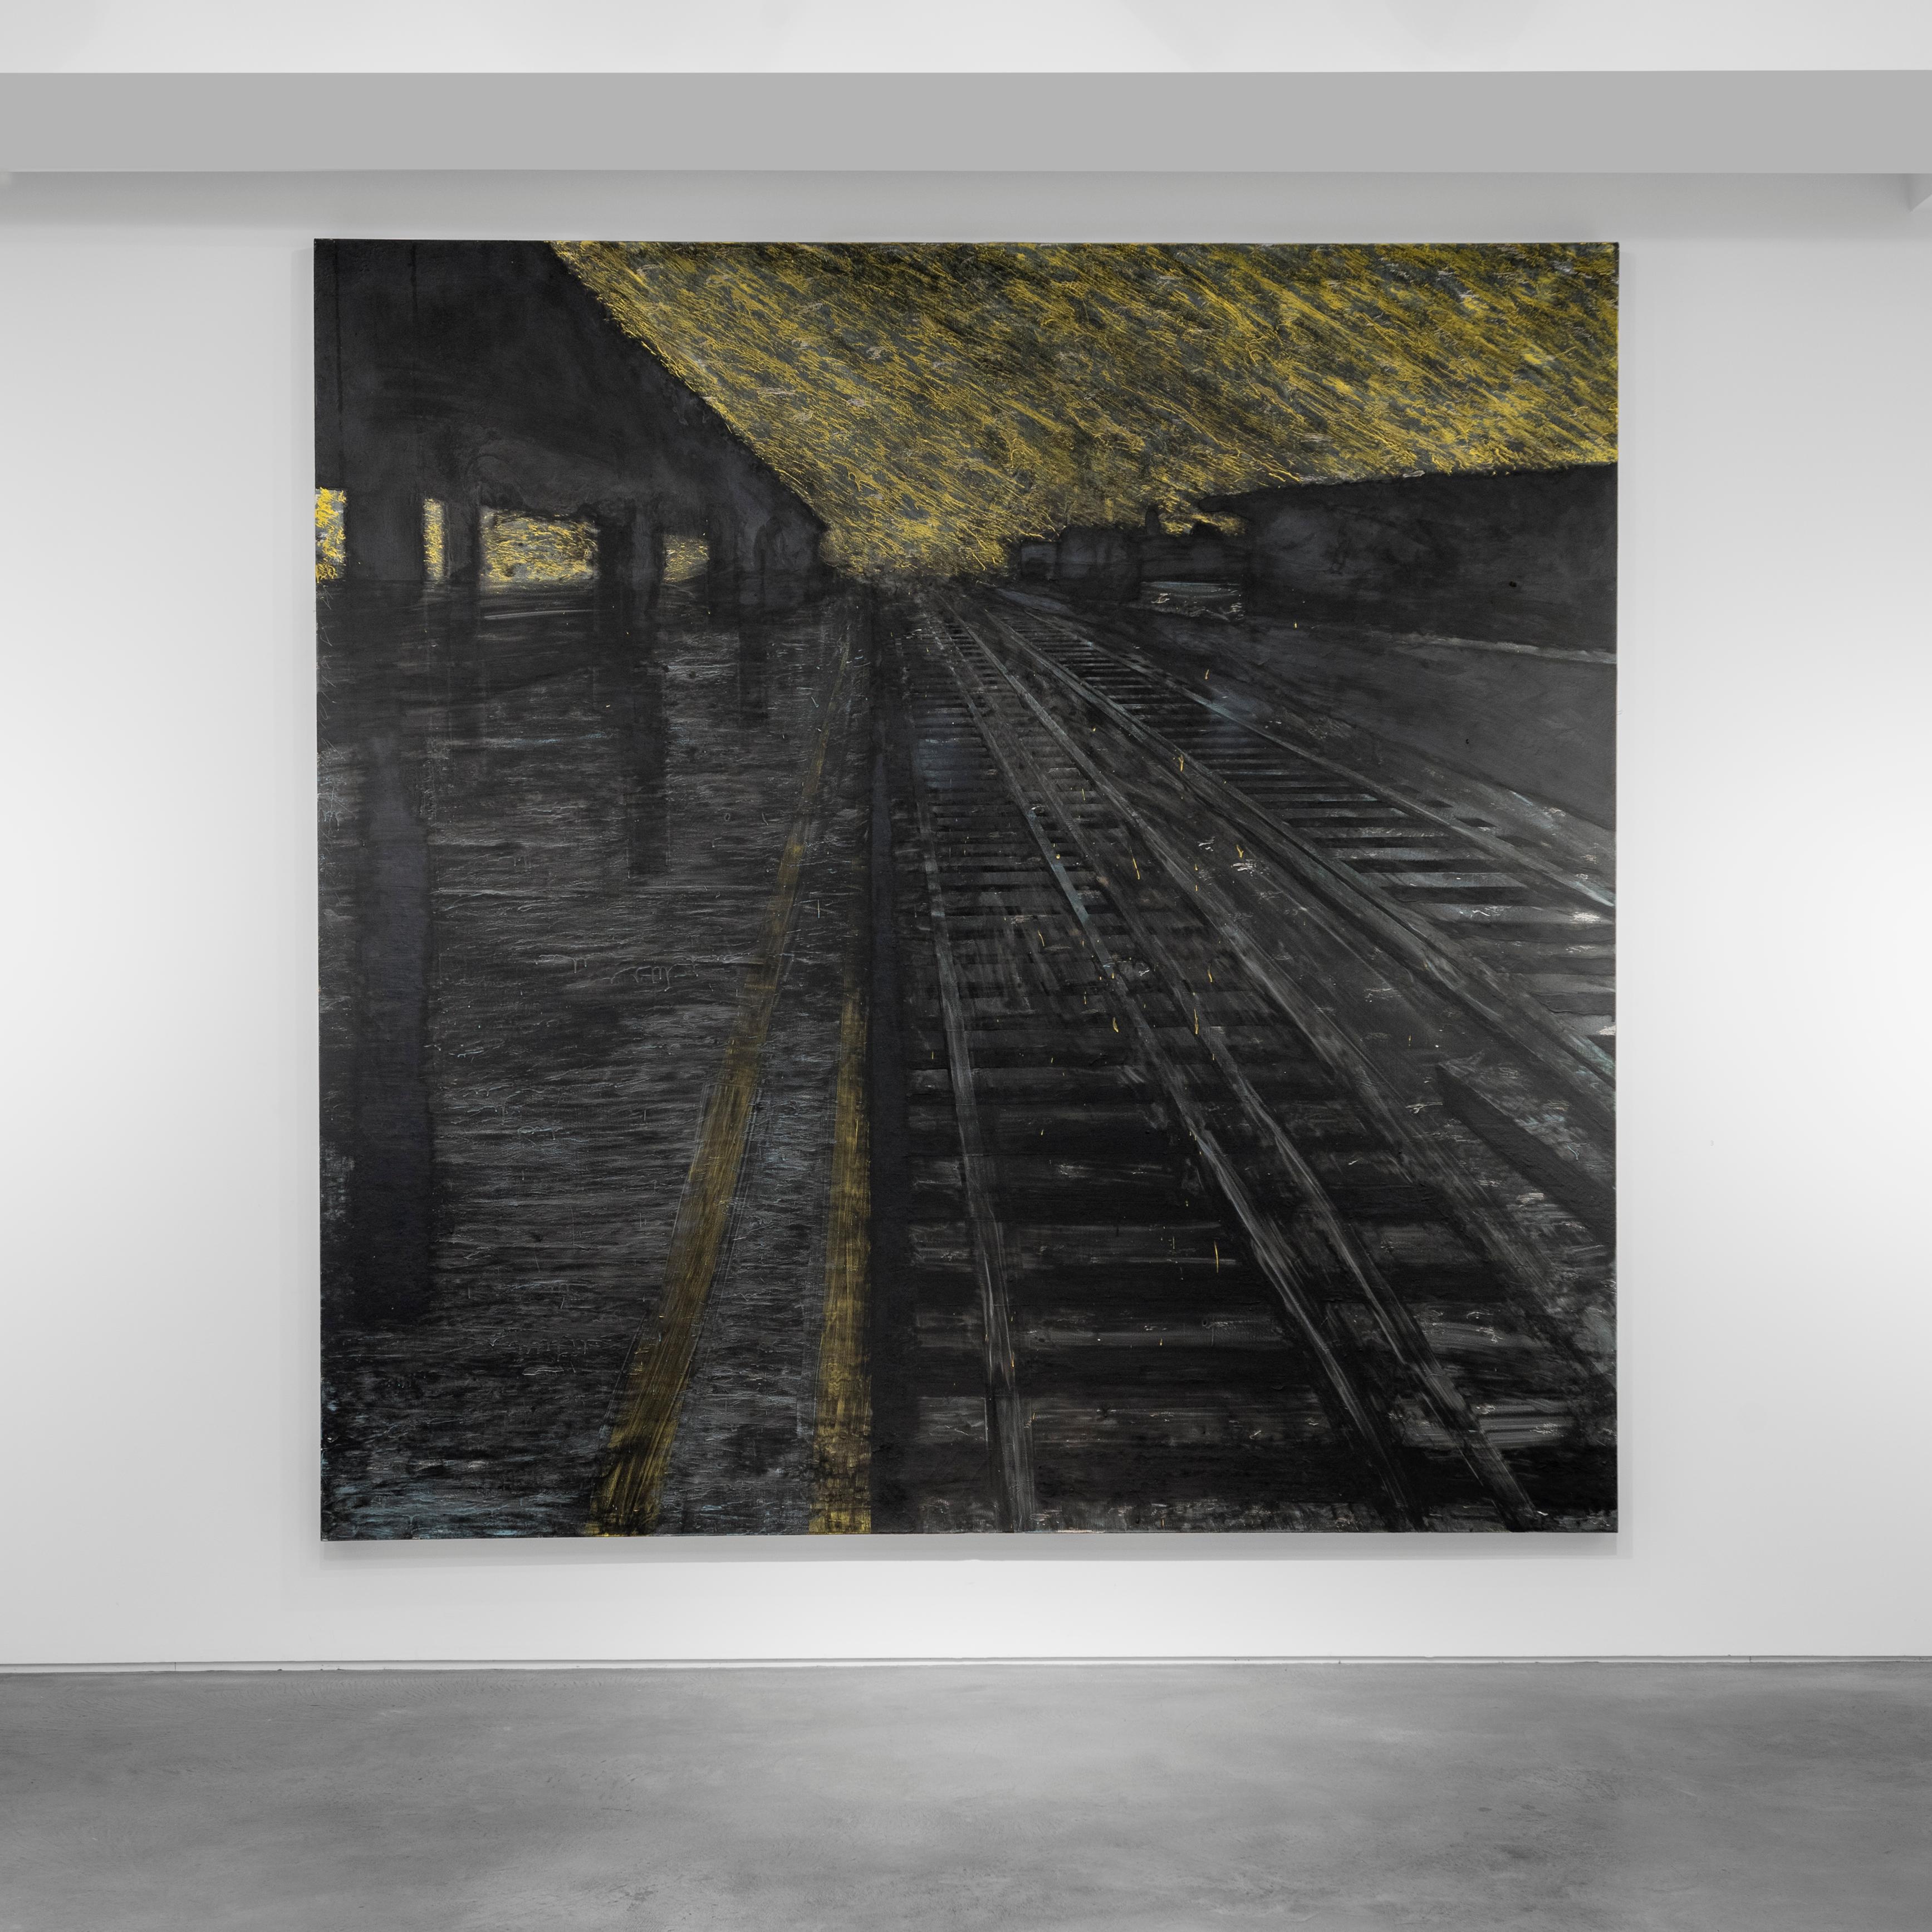 Donald Sultan
Born 1951  
Herndon Railway, 18 August 1988
Latex and tar on canvas
96 x 96 inches

Donald Sultan is an acclaimed American painter known for his large-scale paintings produced using a range of industrial and non-art materials,